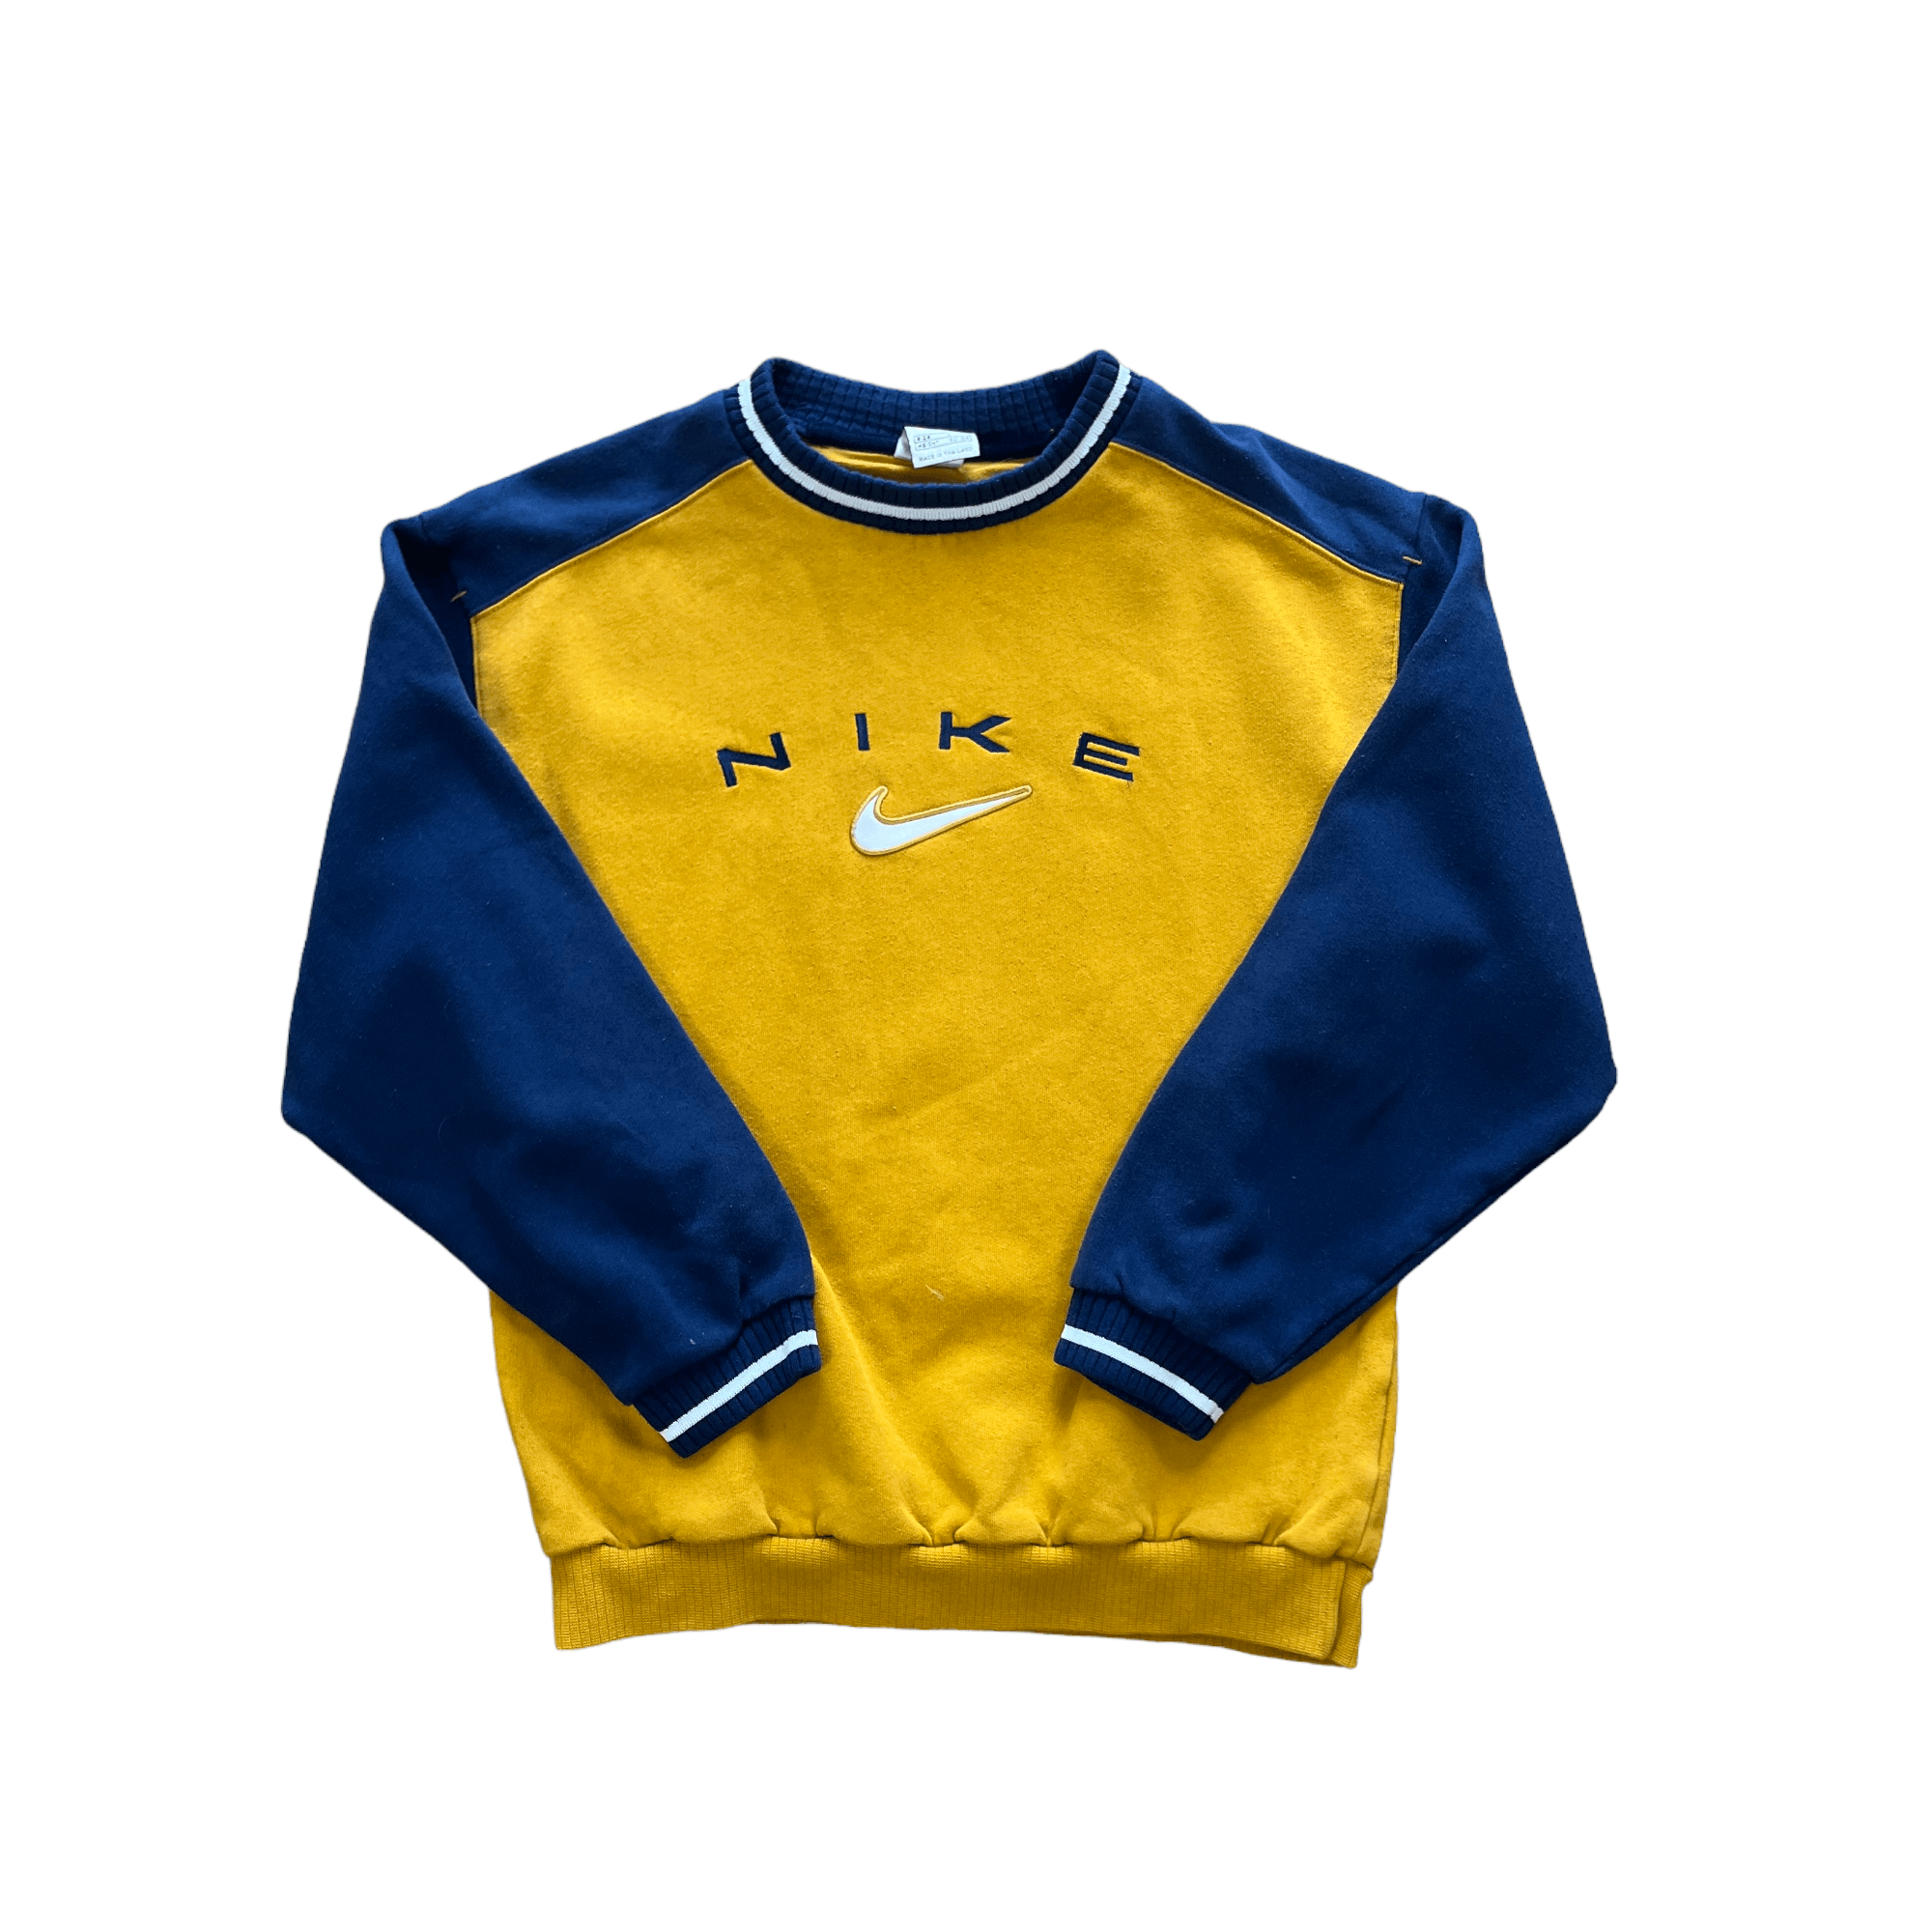 Vintage 90s Navy Blue + Yellow Nike Sweatshirt - Recommended Size - Small - The Streetwear Studio